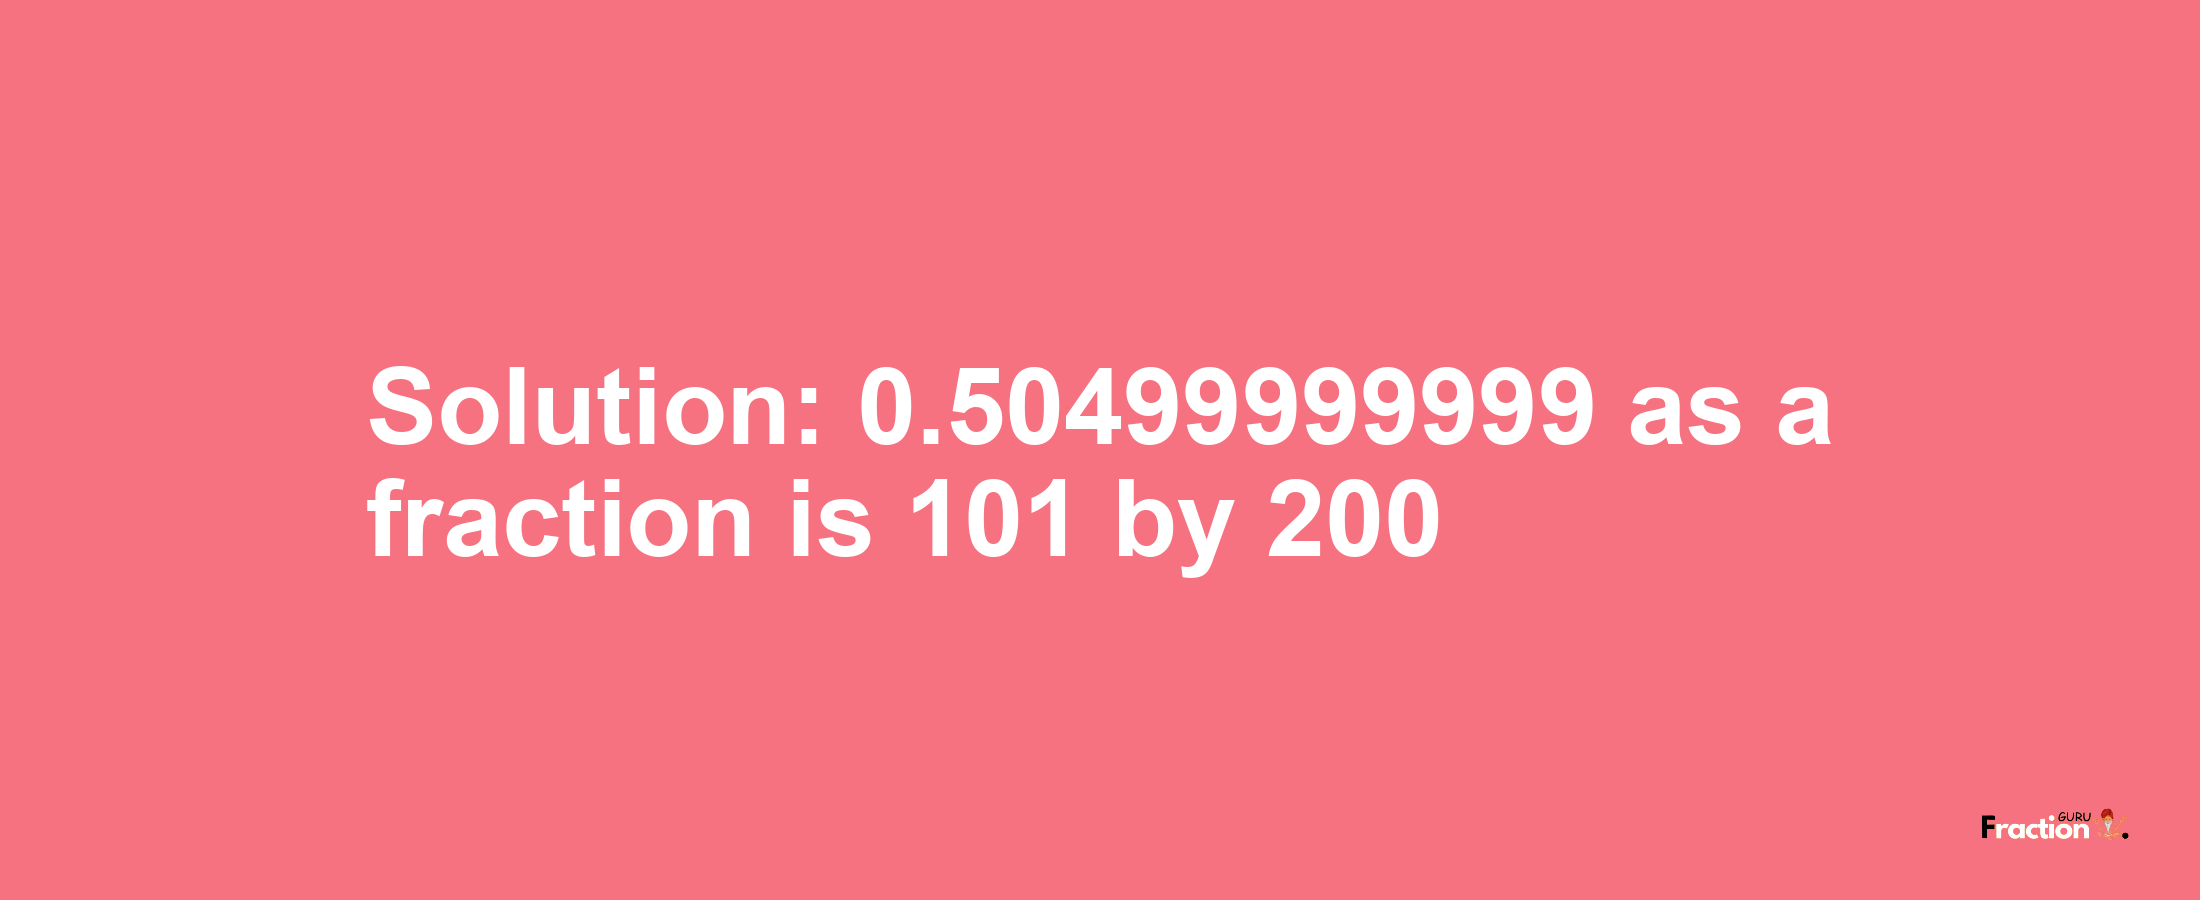 Solution:0.50499999999 as a fraction is 101/200